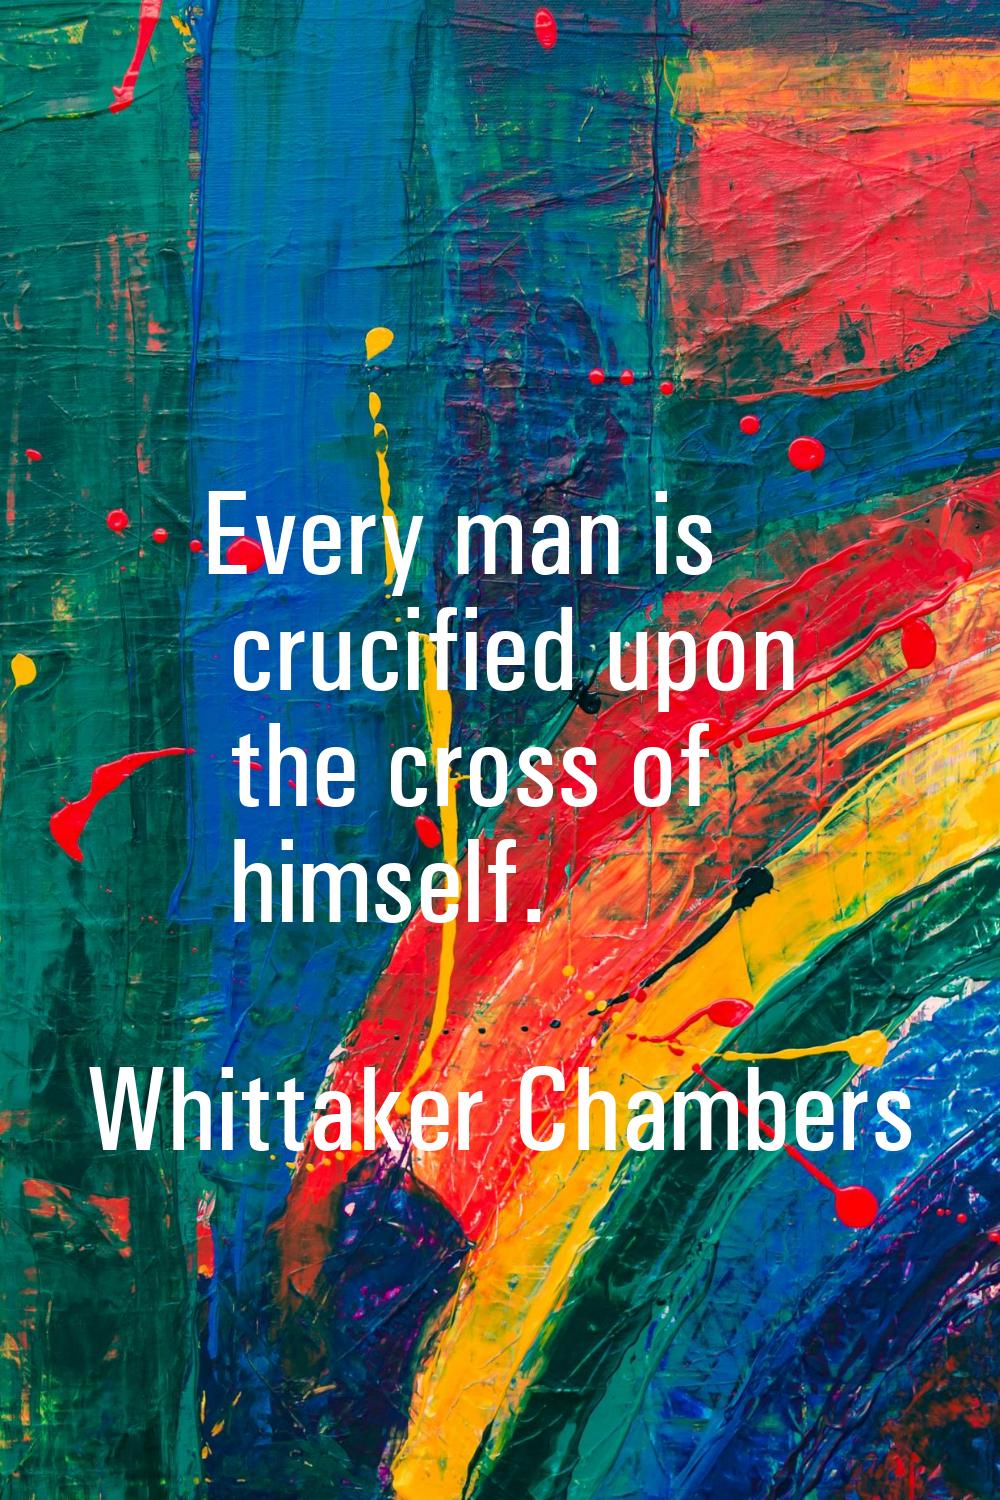 Every man is crucified upon the cross of himself.